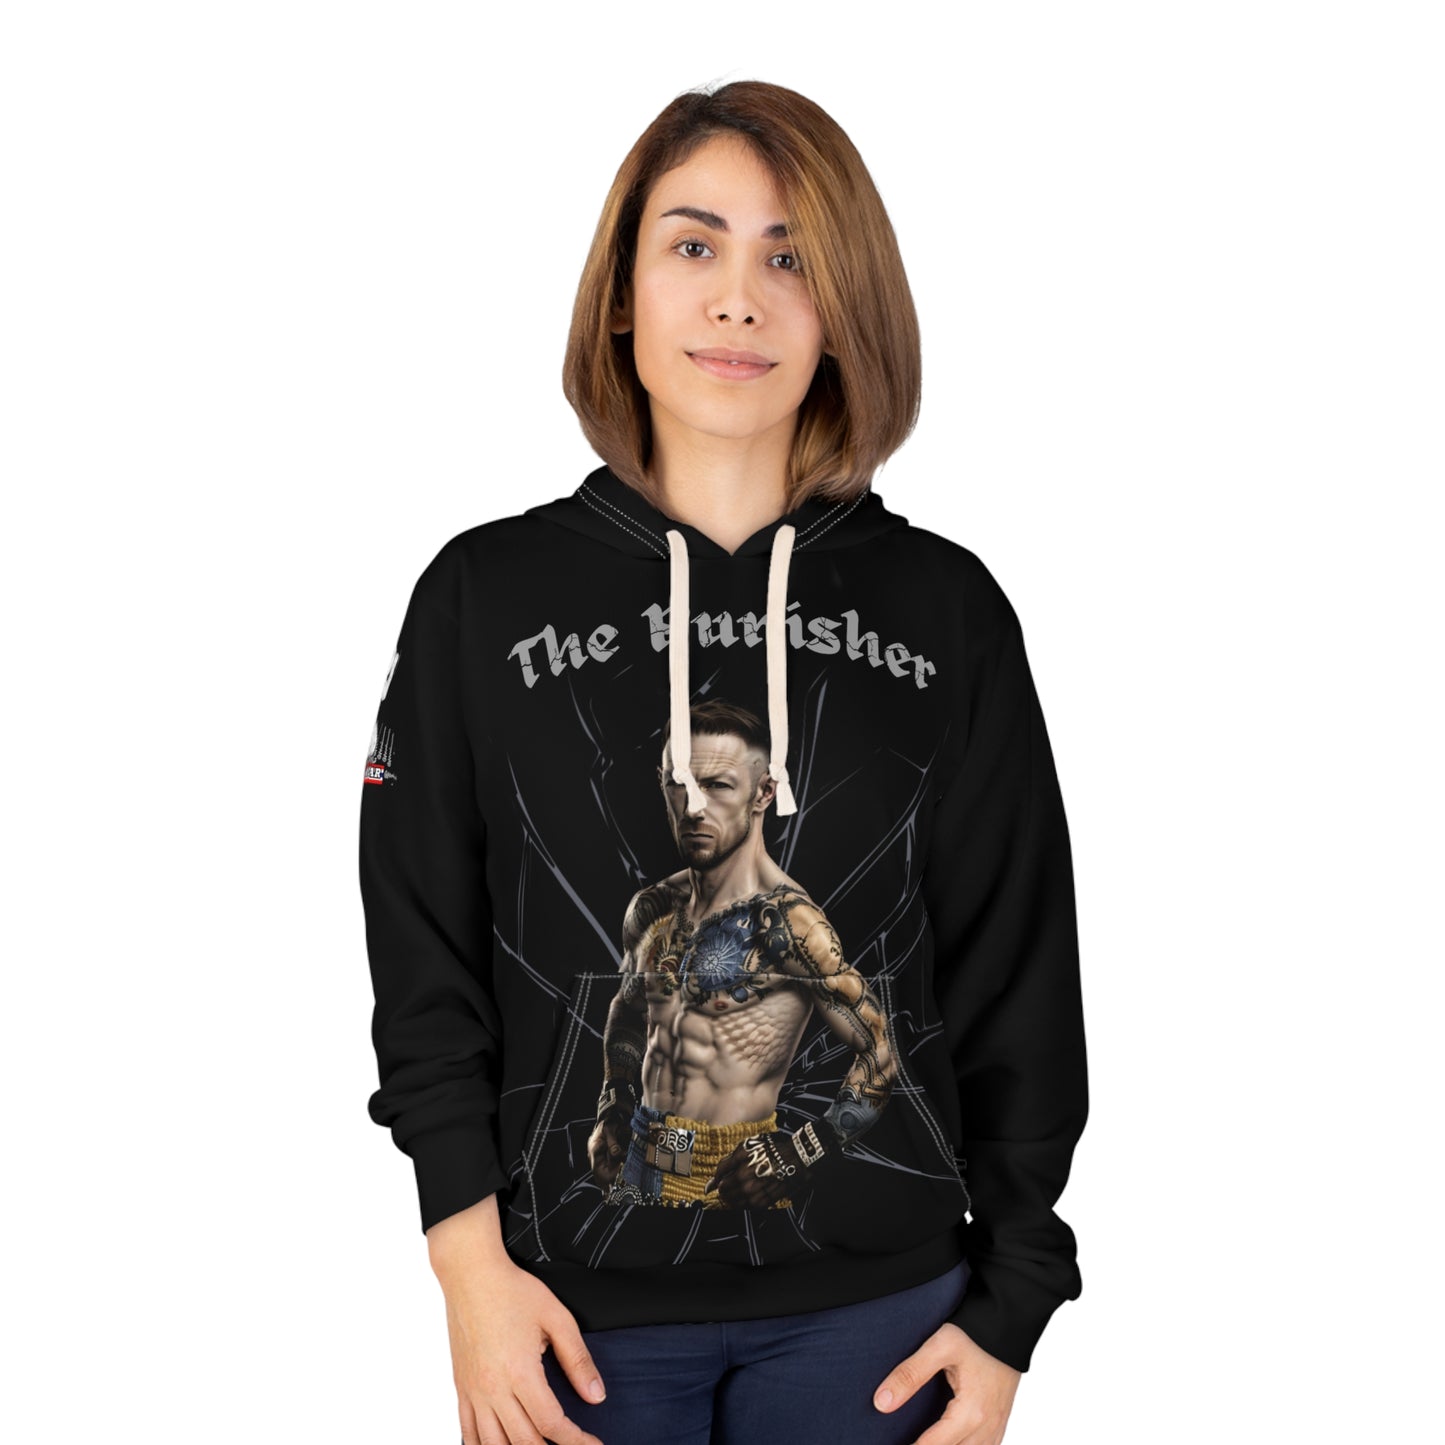 ANDY HOWSON "The Punisher" Premium Hoodie